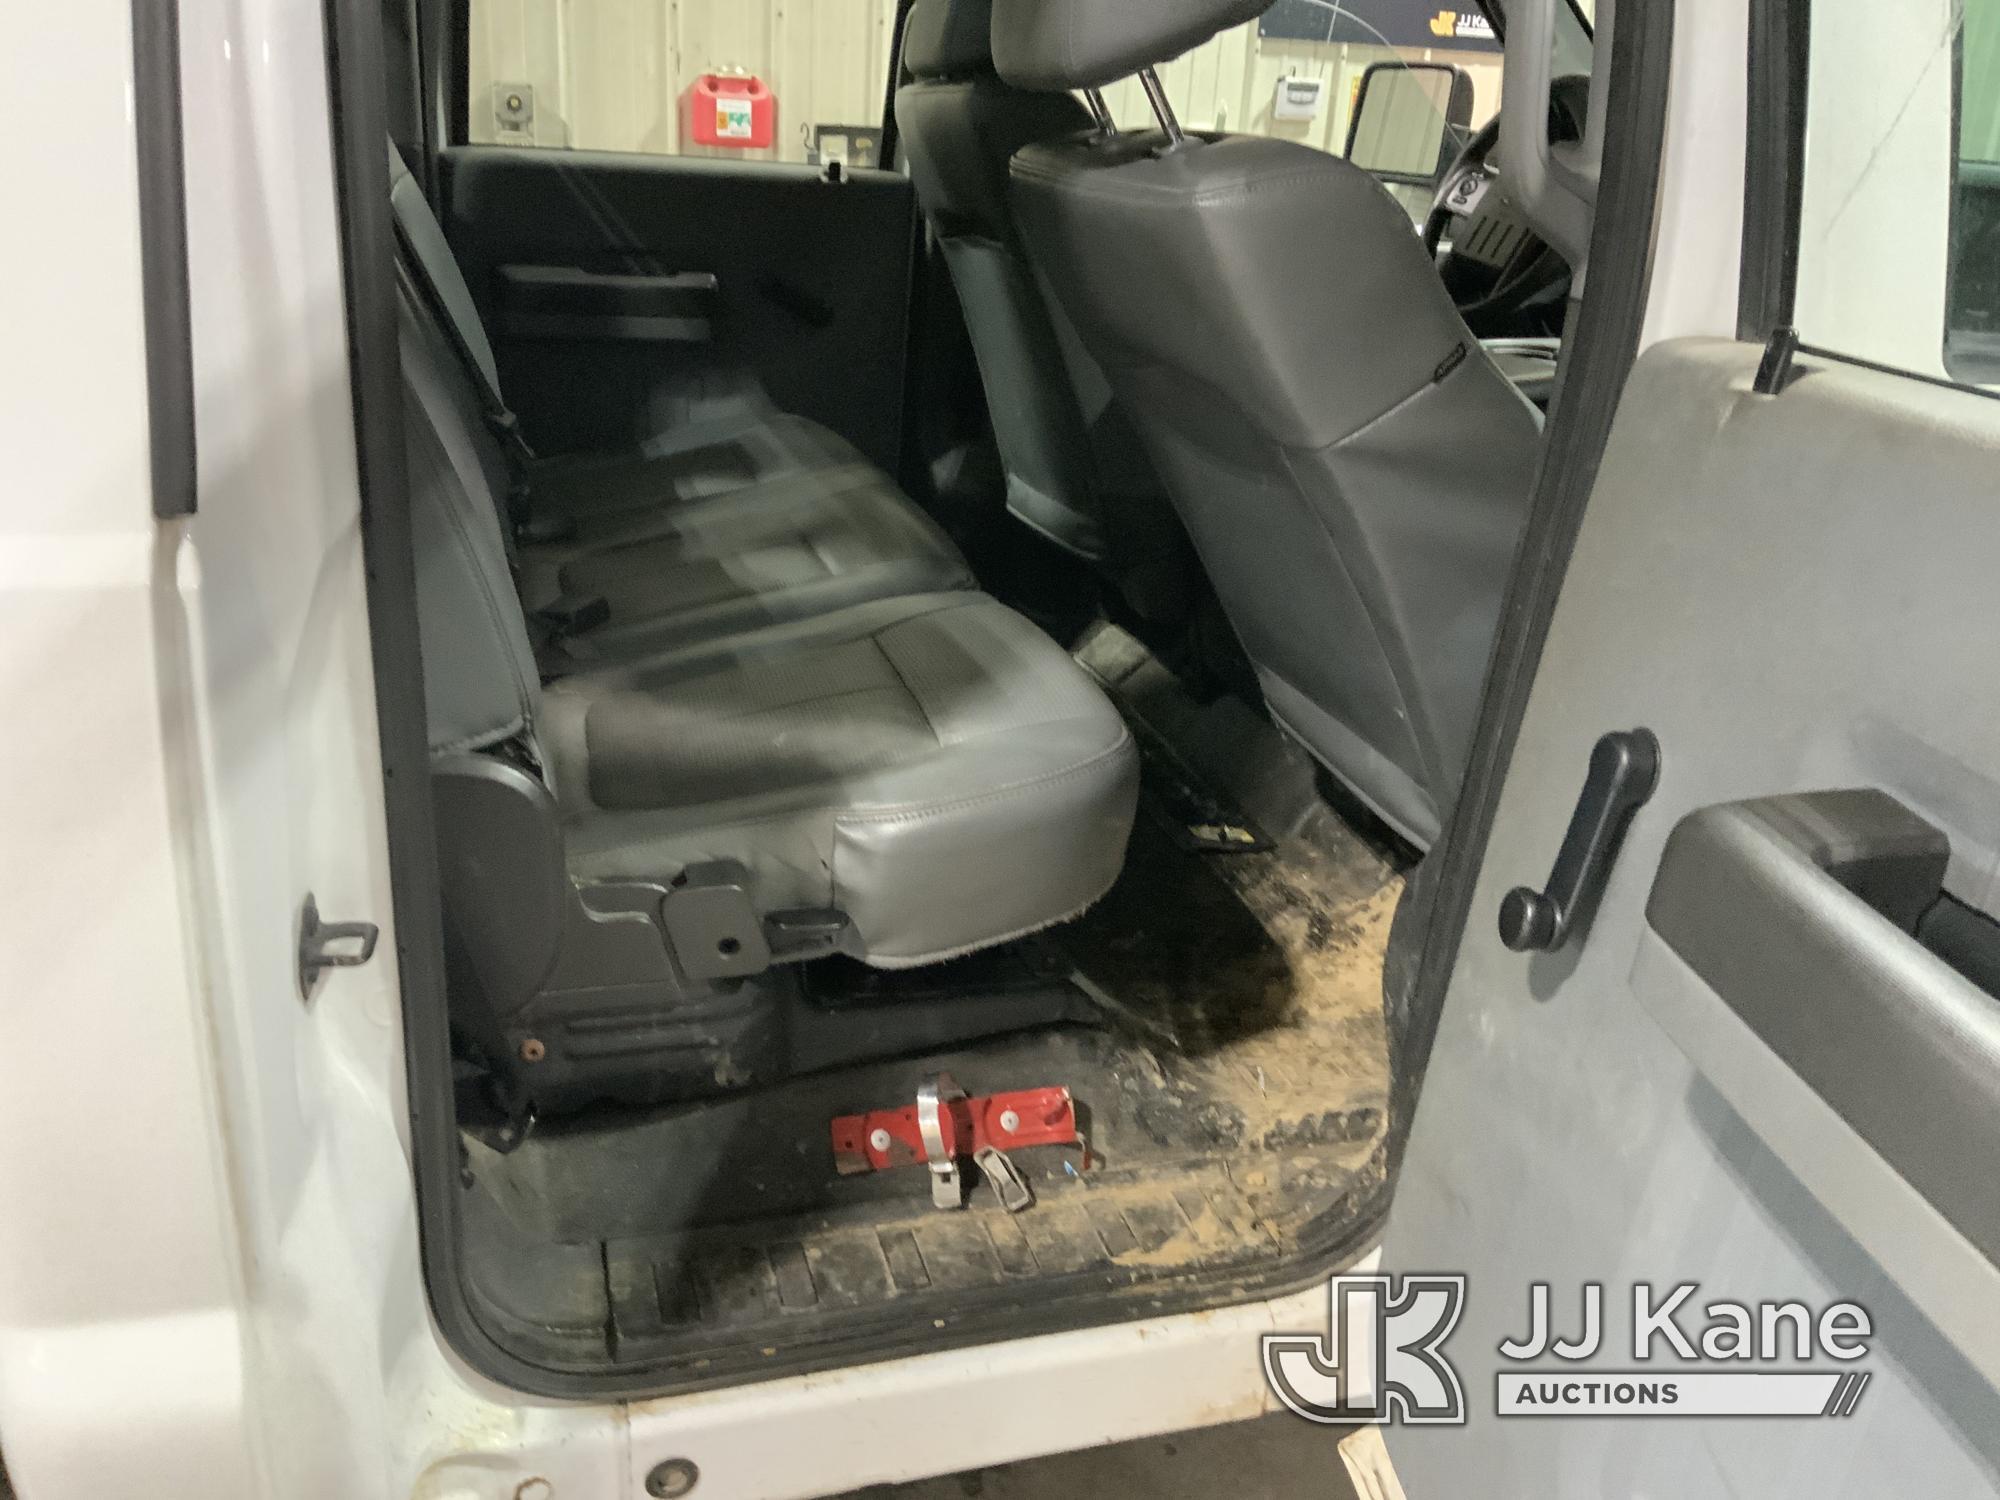 (Fort Wayne, IN) 2014 Ford F250 4x4 Crew-Cab Pickup Truck Runs & Moves) (Engine Noise, Body Damage,